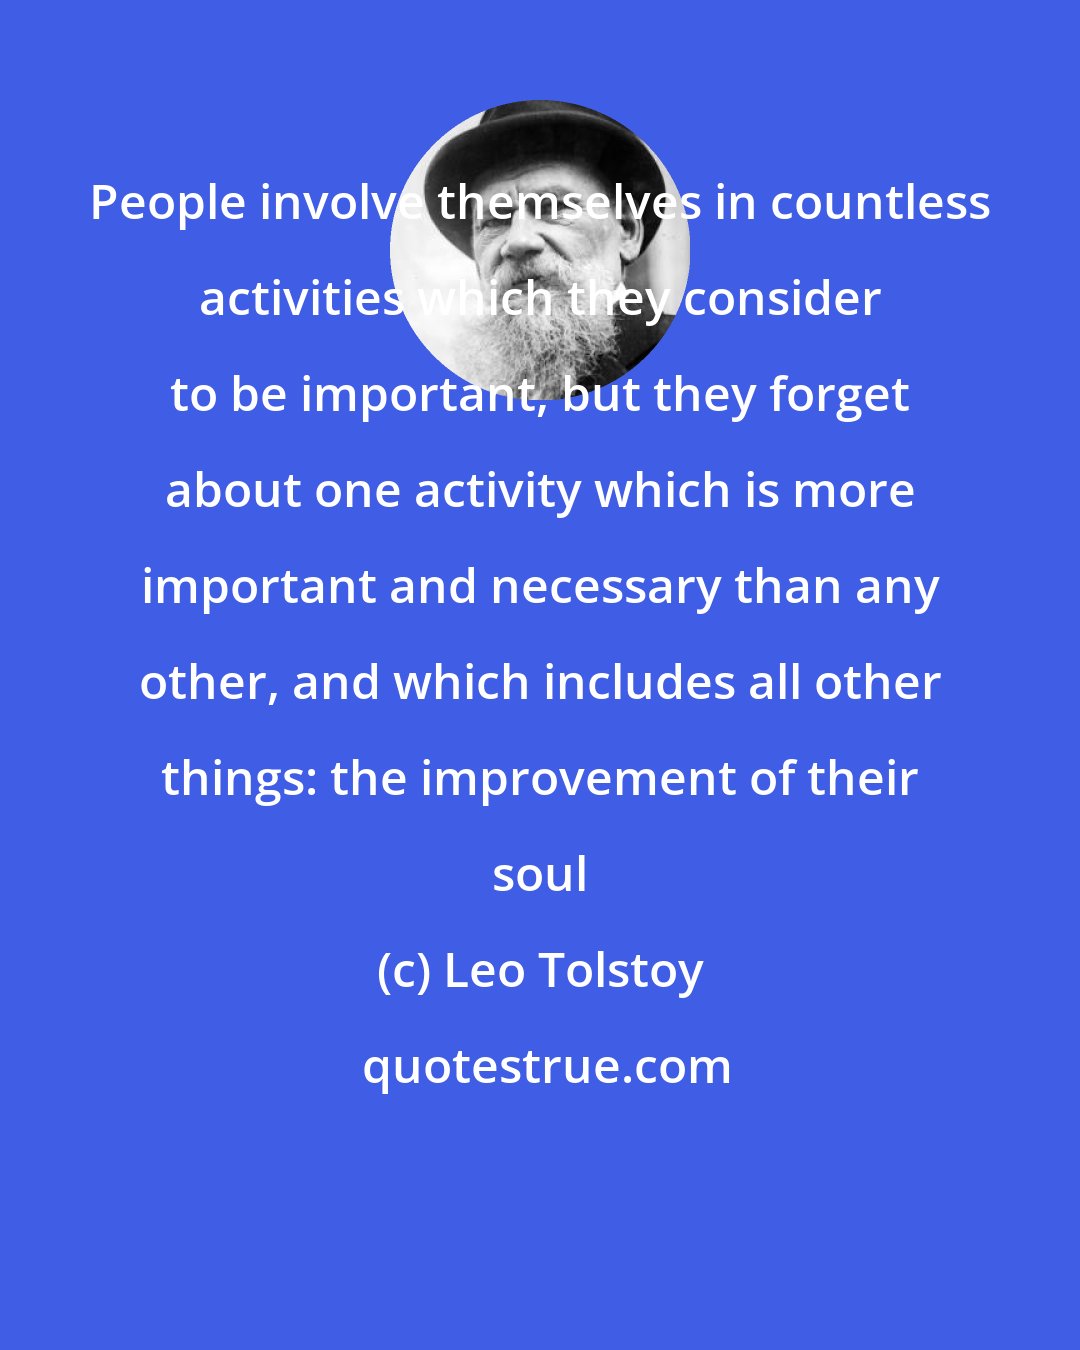 Leo Tolstoy: People involve themselves in countless activities which they consider to be important, but they forget about one activity which is more important and necessary than any other, and which includes all other things: the improvement of their soul